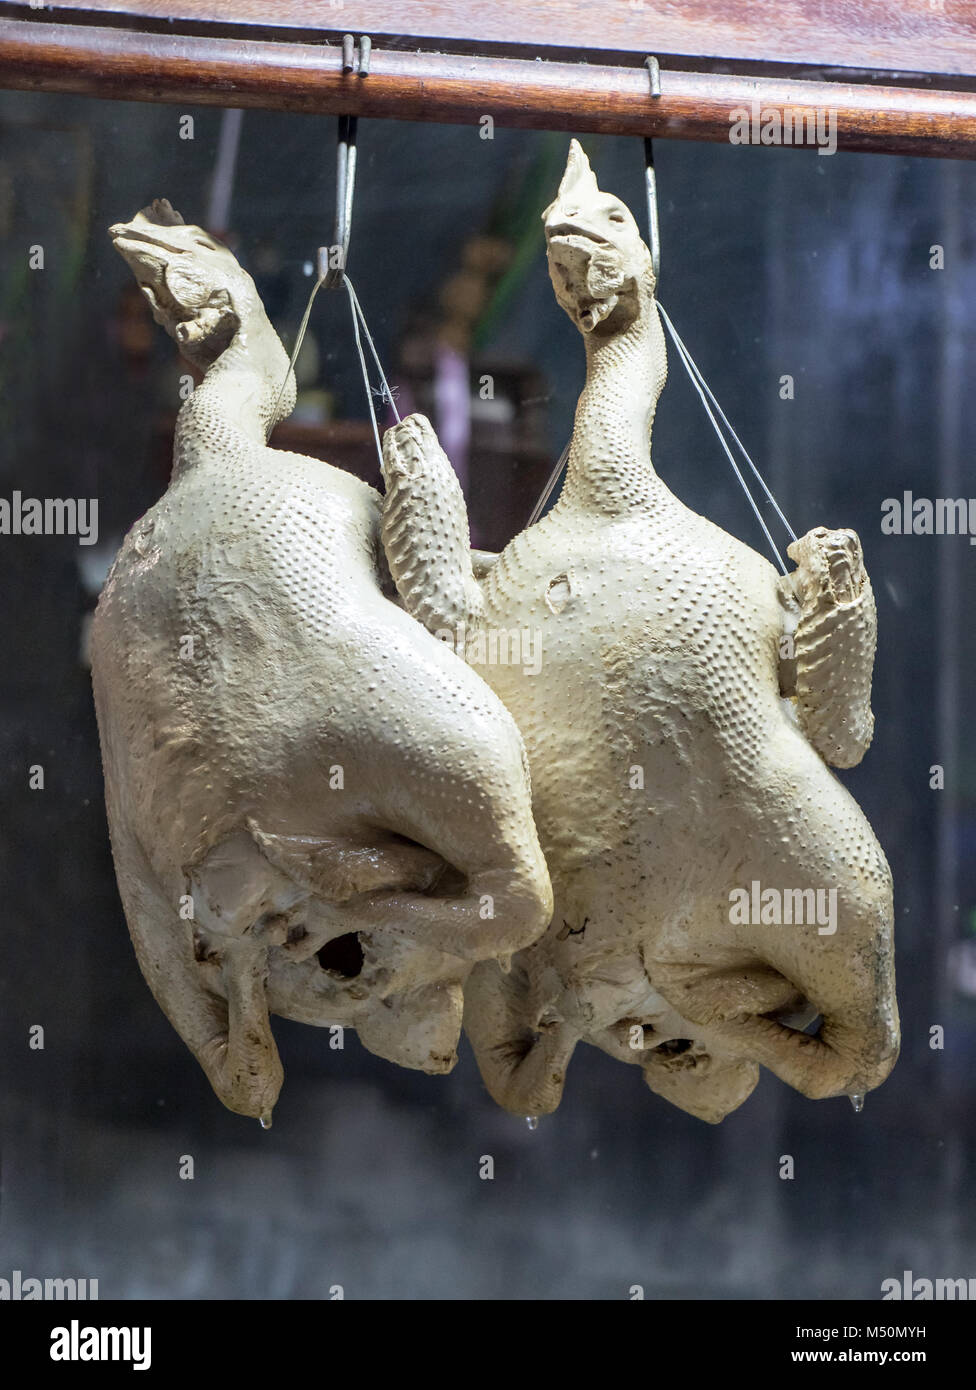 Offer of poultry in an Asian restaurant. The whole chick hangs in the showcase. Stock Photo